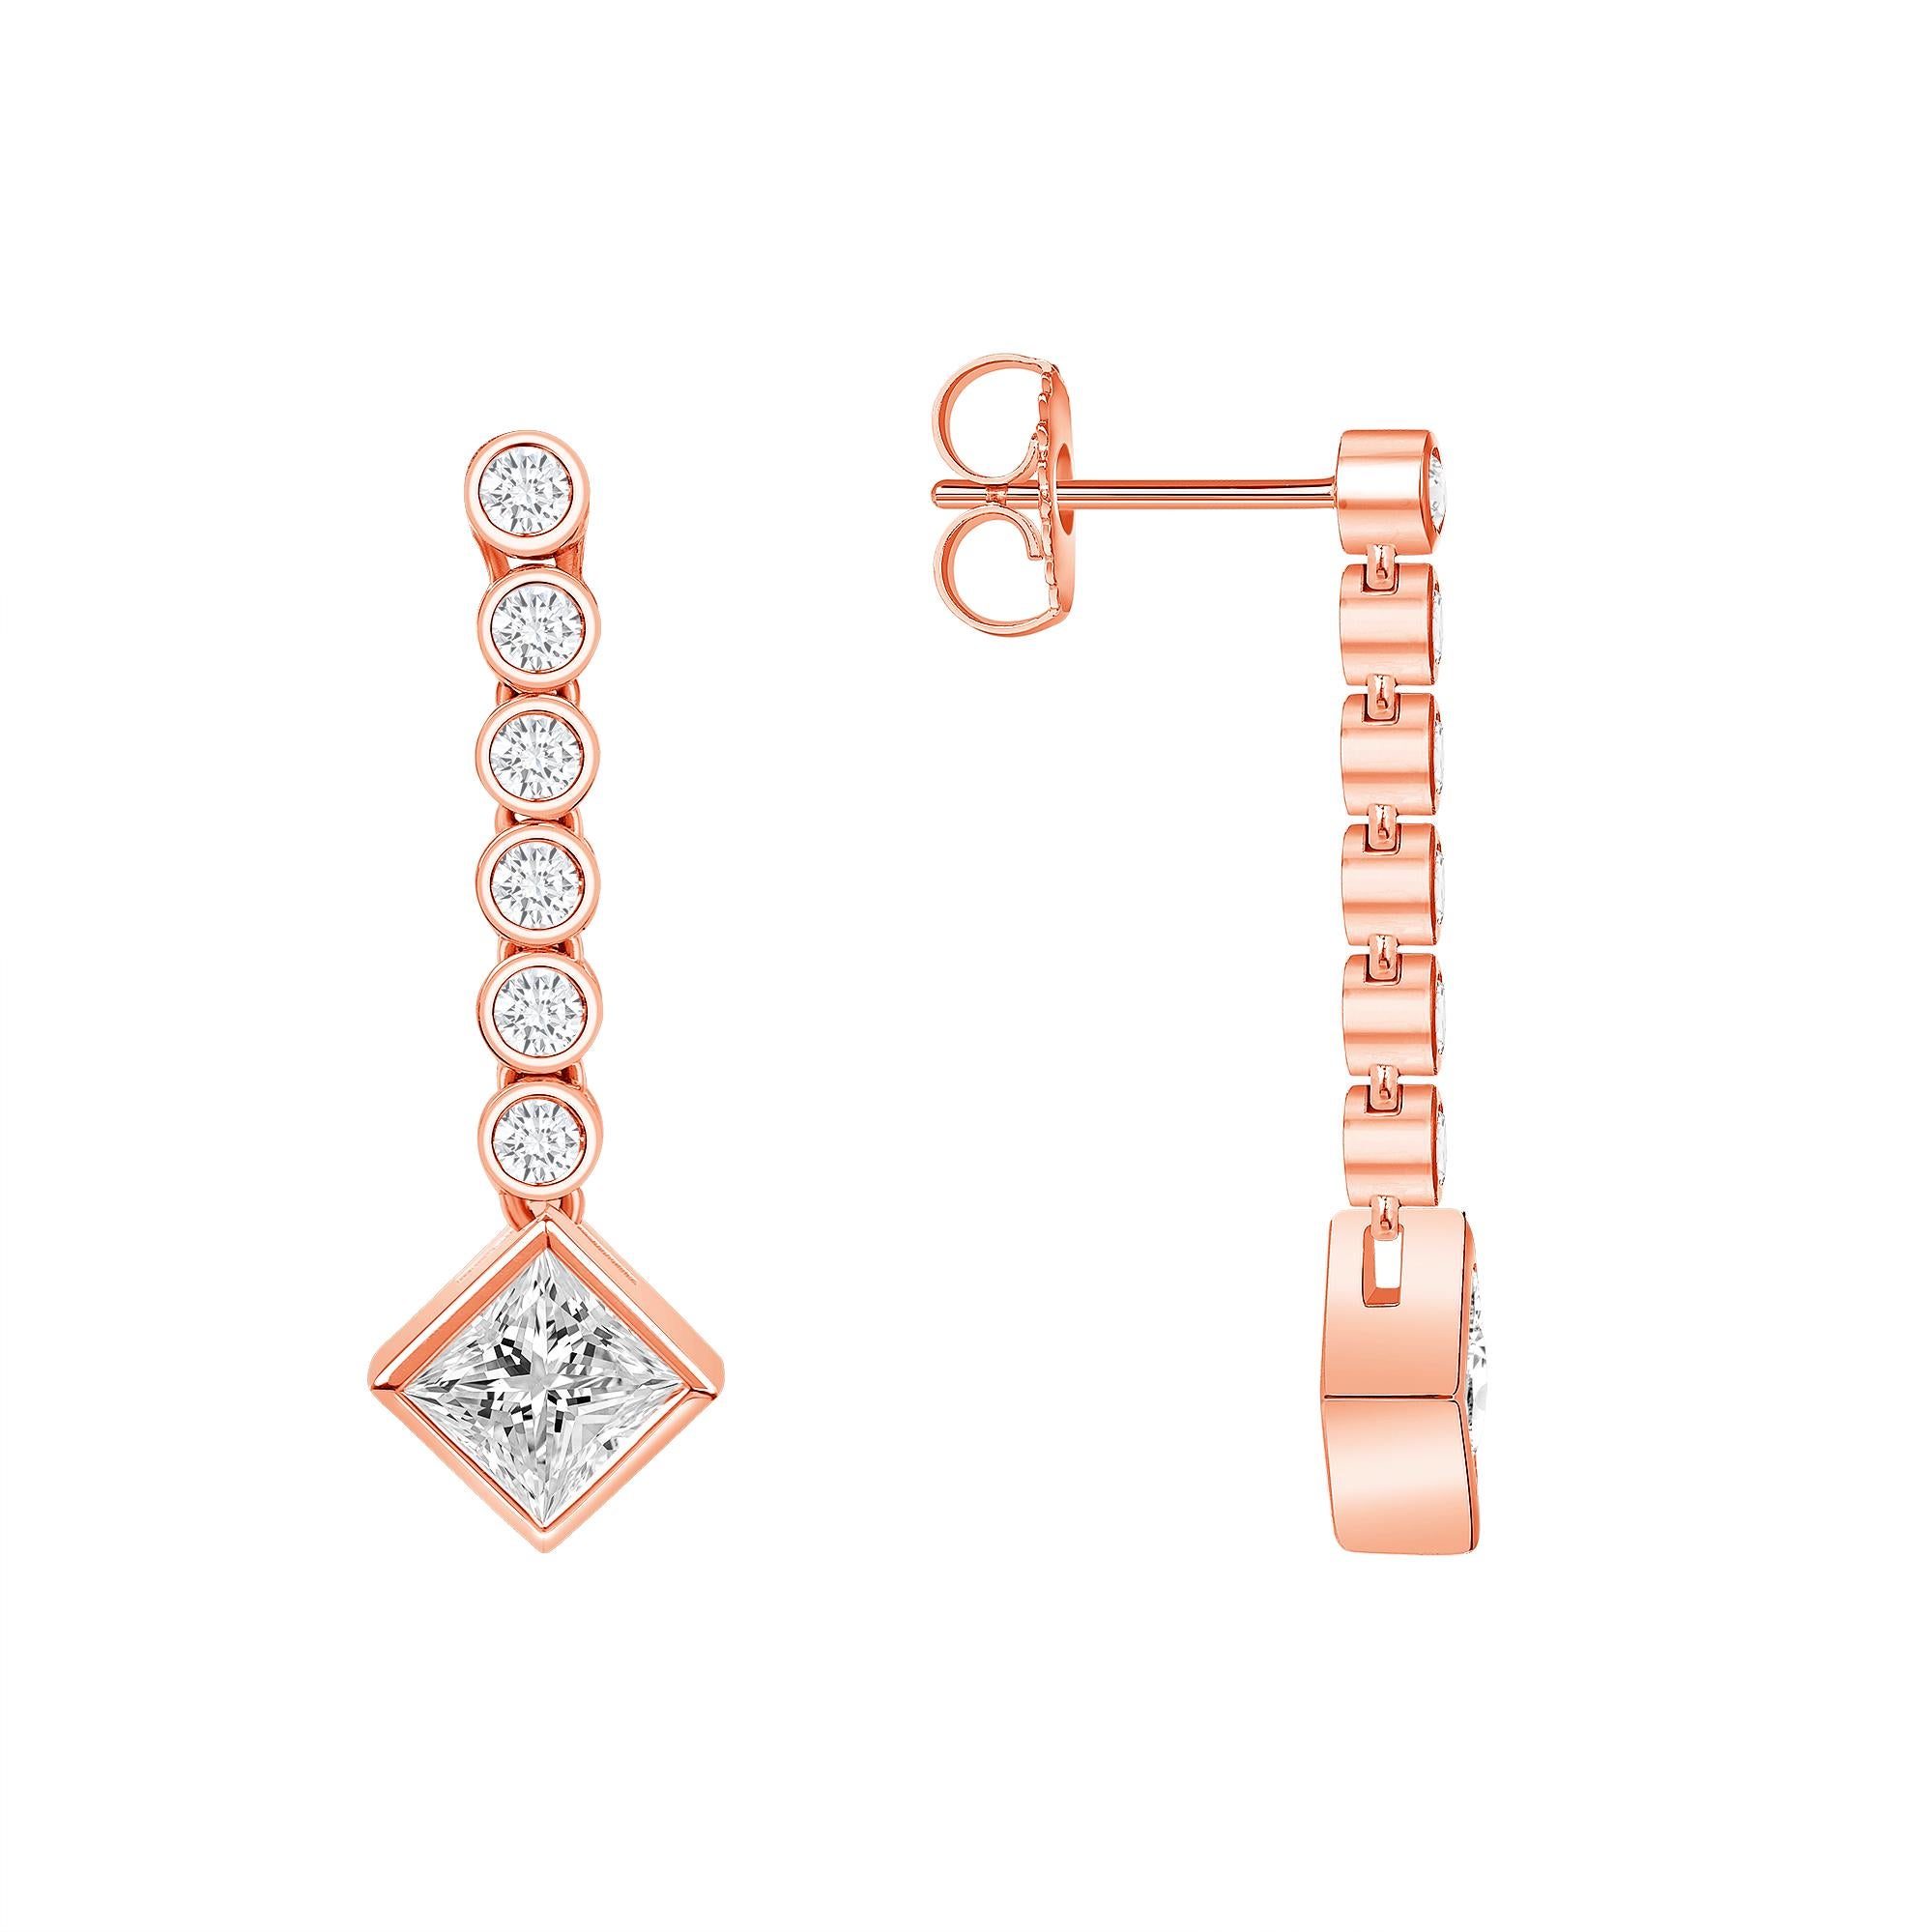 18K Rose Gold Princess Drop Earring, Dangling Earring, Dainty Bridal Jewelry,  Square Gold Earrings, Diamond Dangle Earrings, Real Diamond Earrings

This is a beautiful princess cut design drop earrings. It is set in real solid 18Kt Gold. You can